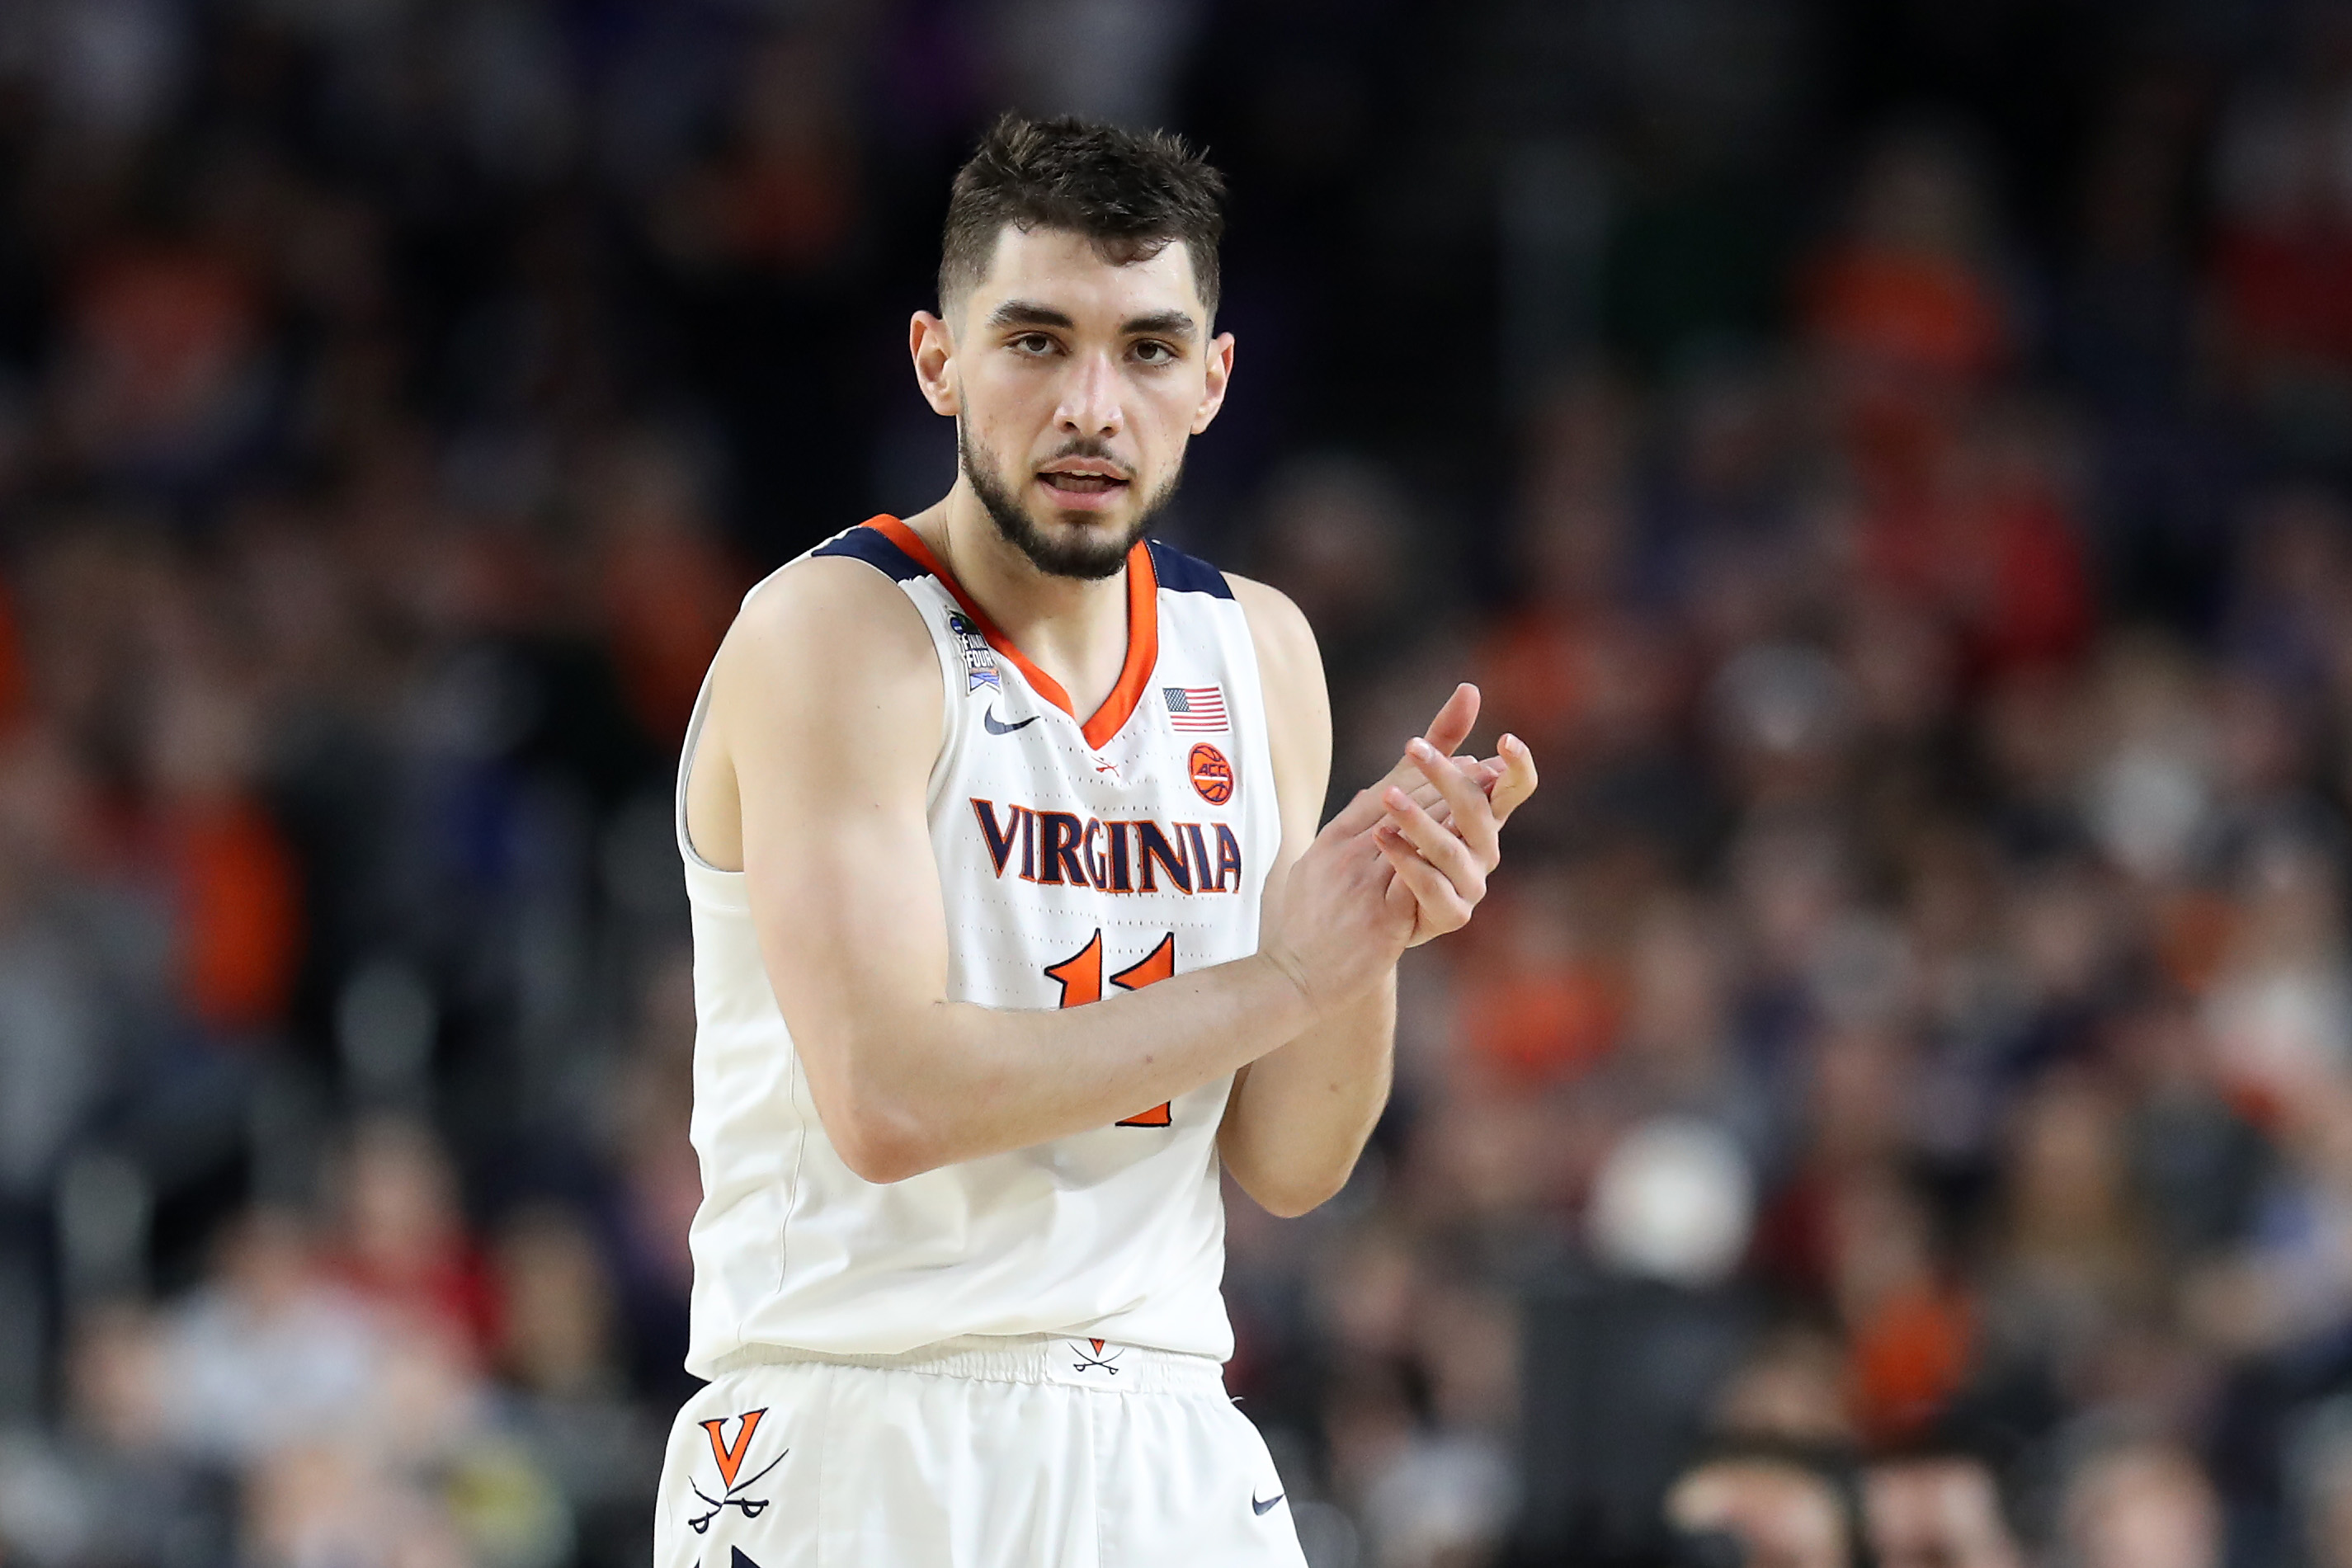 Highlight: Virginia's Ty Jerome puts Cavaliers up 10 with five minutes left to play